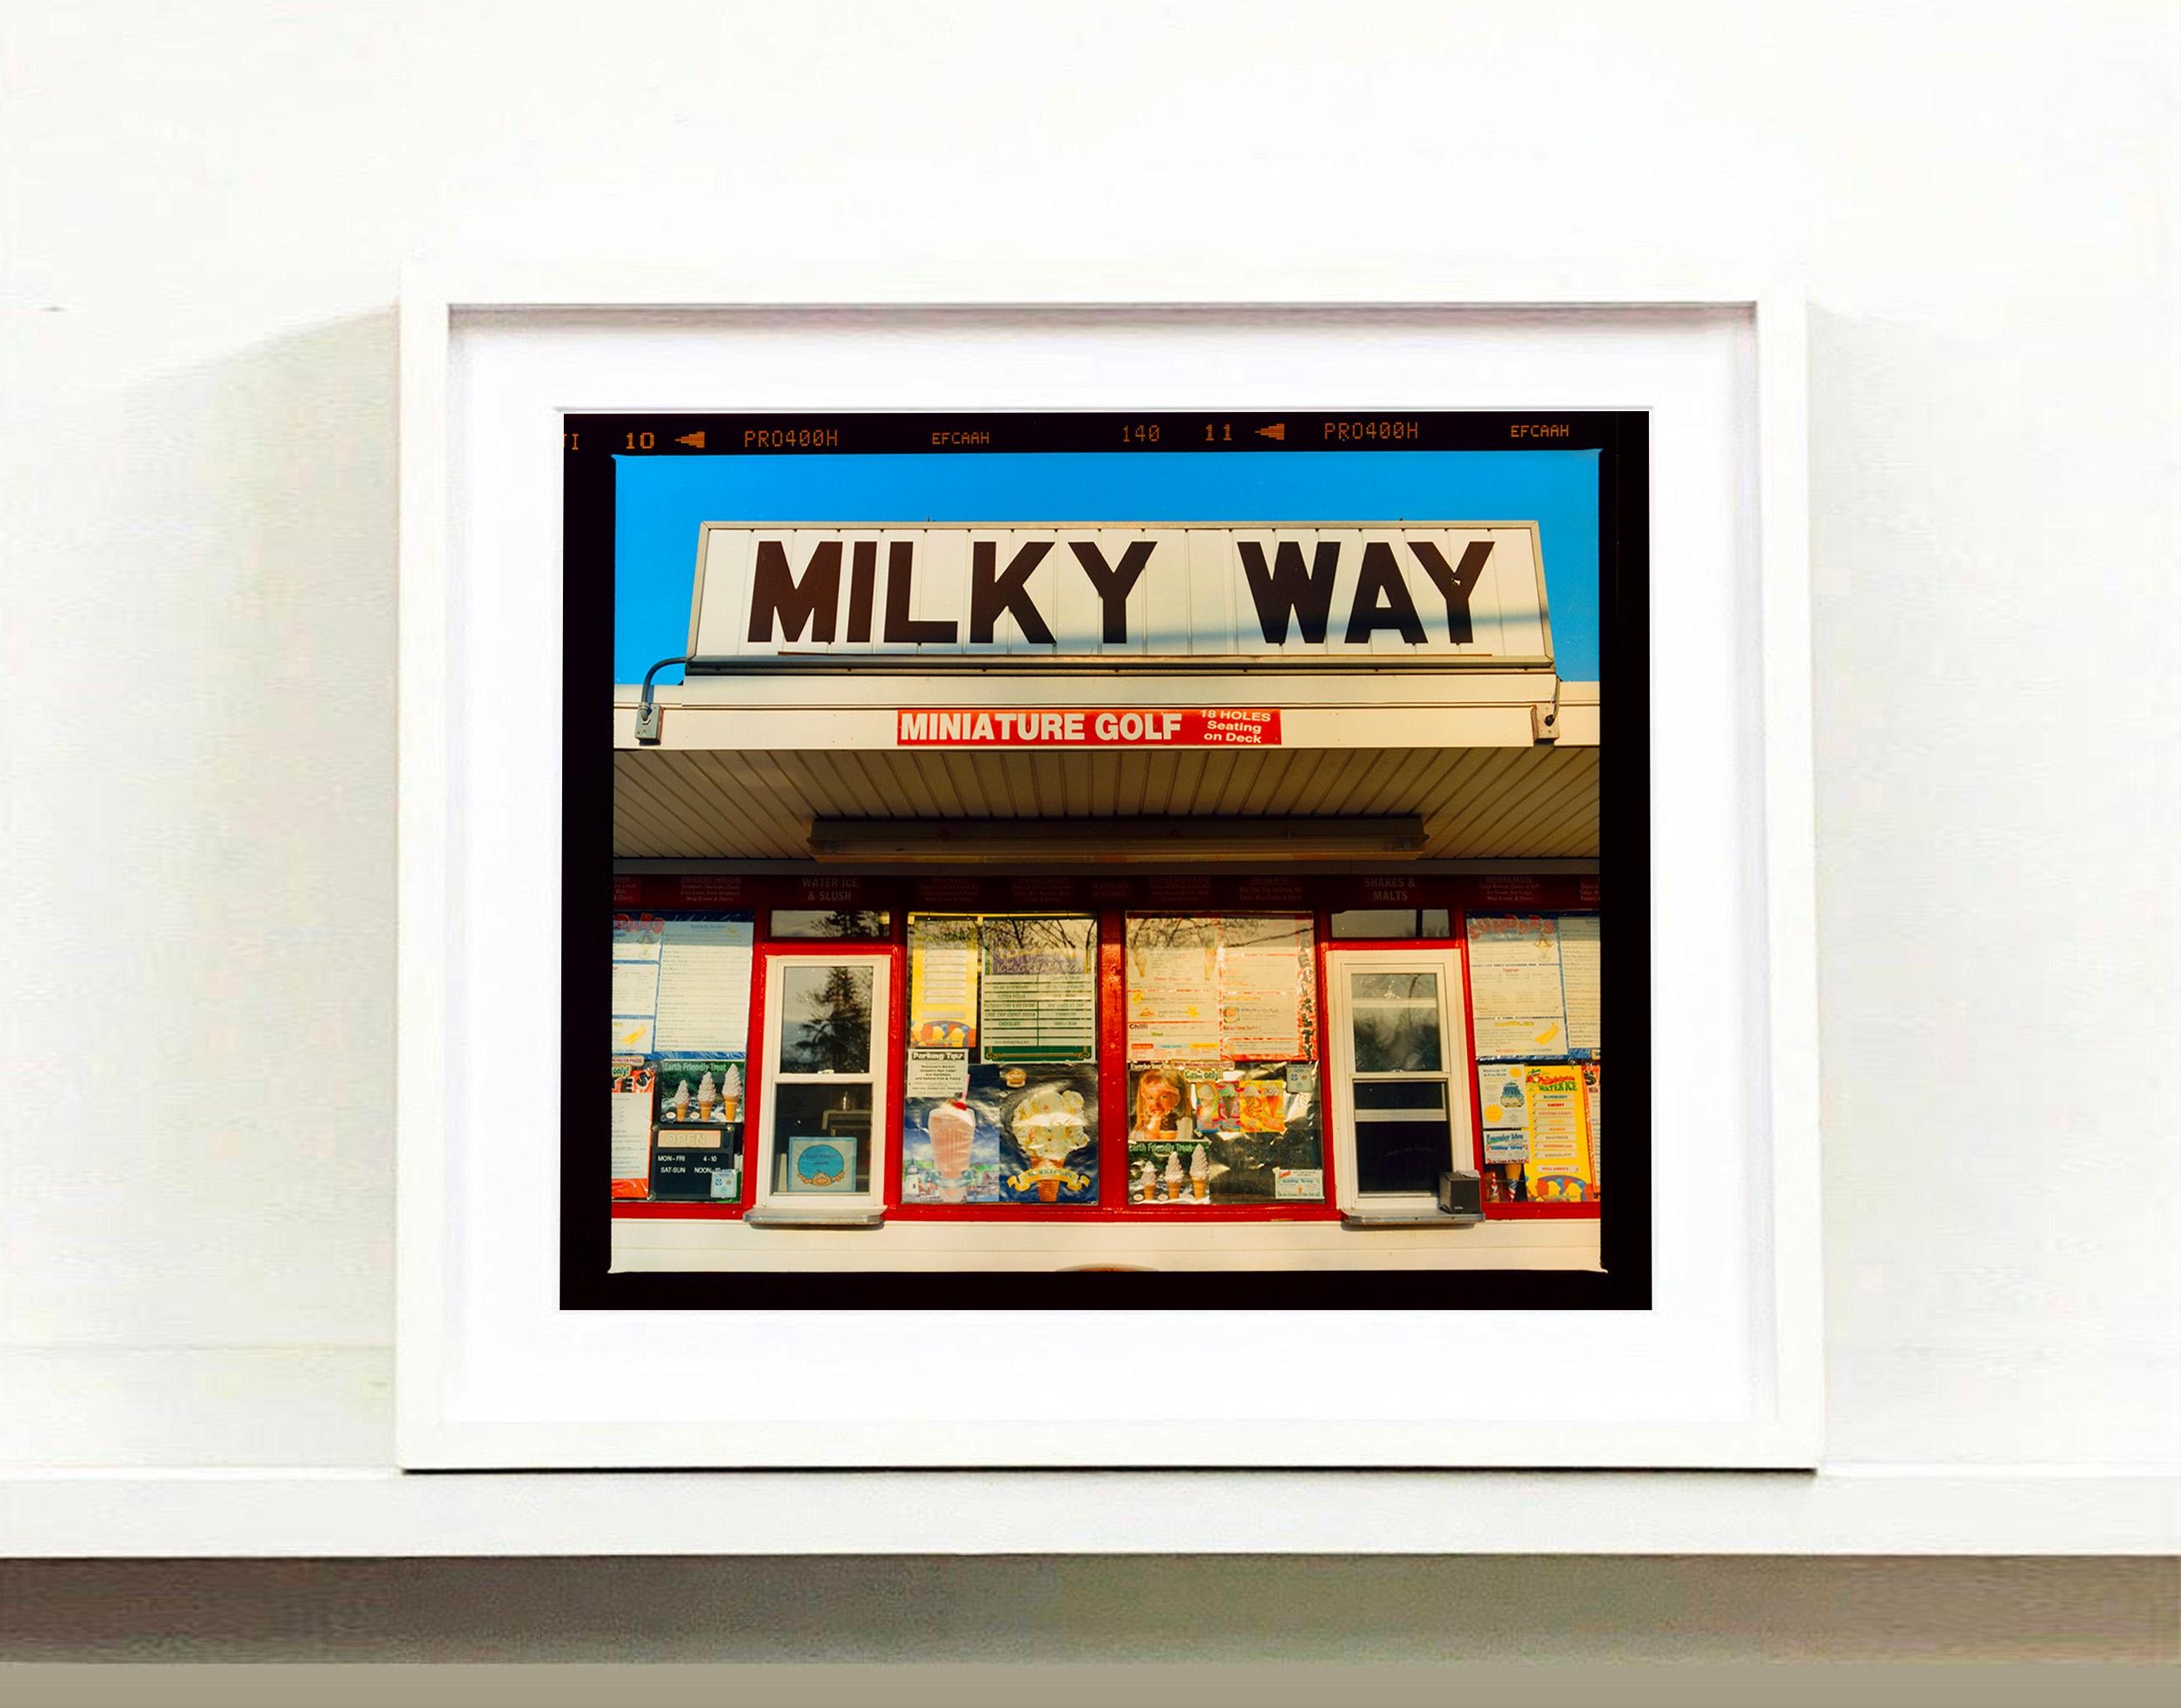 'Milky Way' on the road to Cape May from Richard Heeps Jersey Shore series. Taken in April 2013, this picture was first executed in Richard's darkroom in October 2020, he presents it full frame showing the film rebate. 
This roadside America